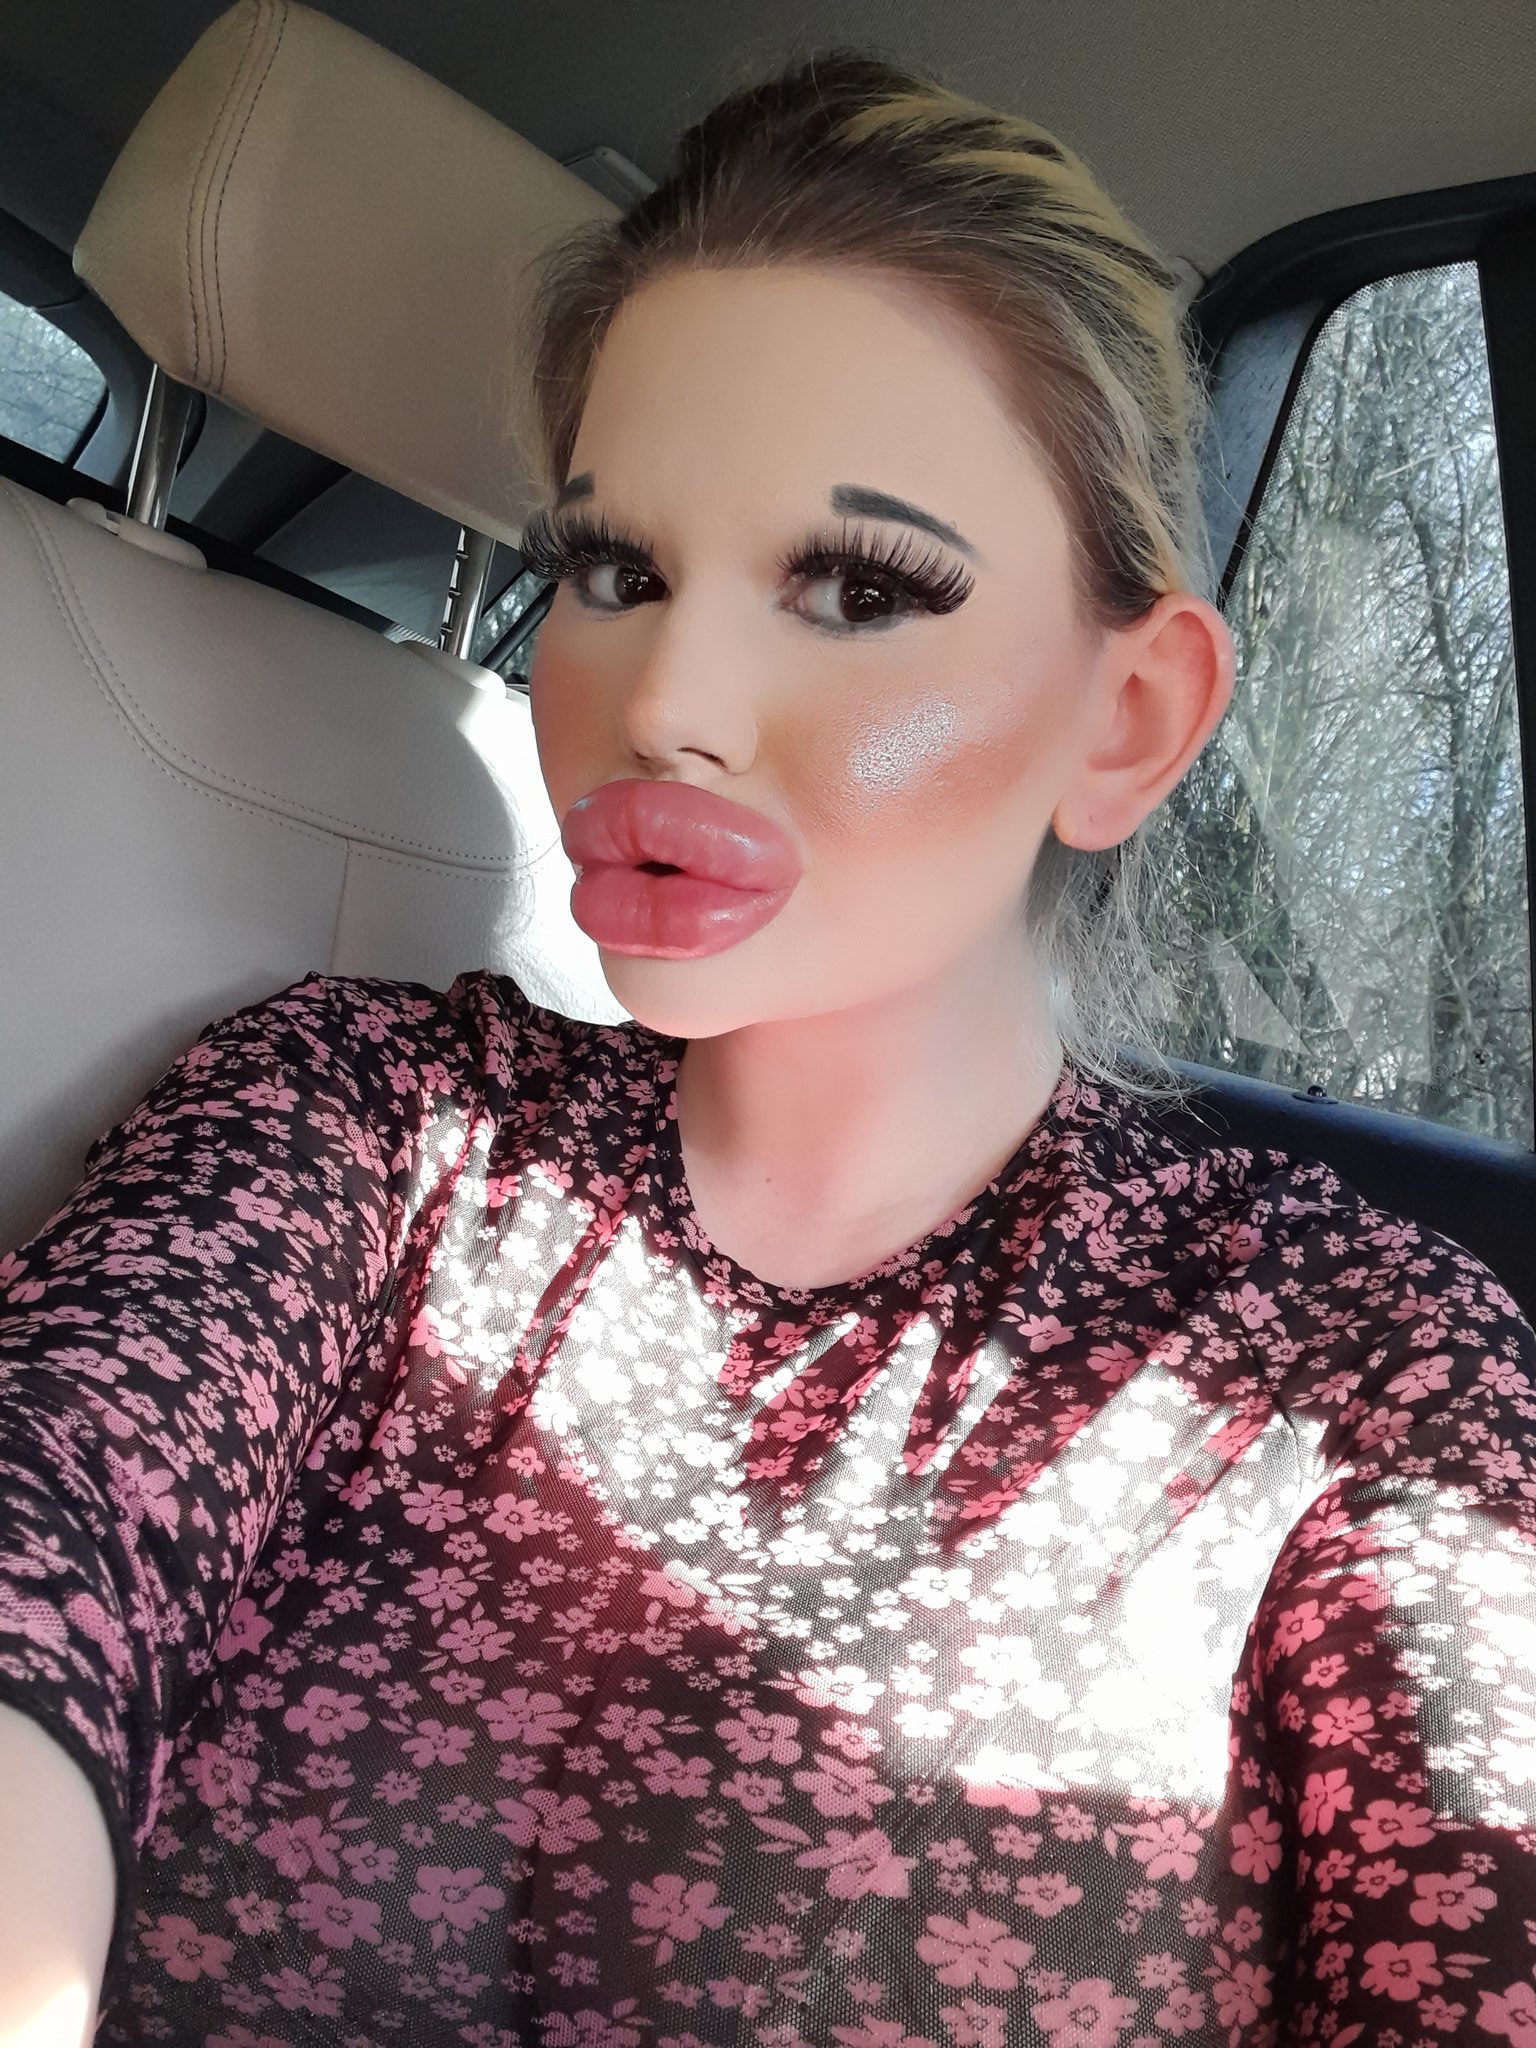 Andrea Ivanova on X: "#world #famous #girl #biggest #lips #silicone  #implants #bulgarian #barbie #grandes #labios #mundo #tiene #cool #makeup  #blonde #hair #sweet #beautiful #lovely #love #injections #lip #fillers  #hialyronic #acid #chin #jawline #